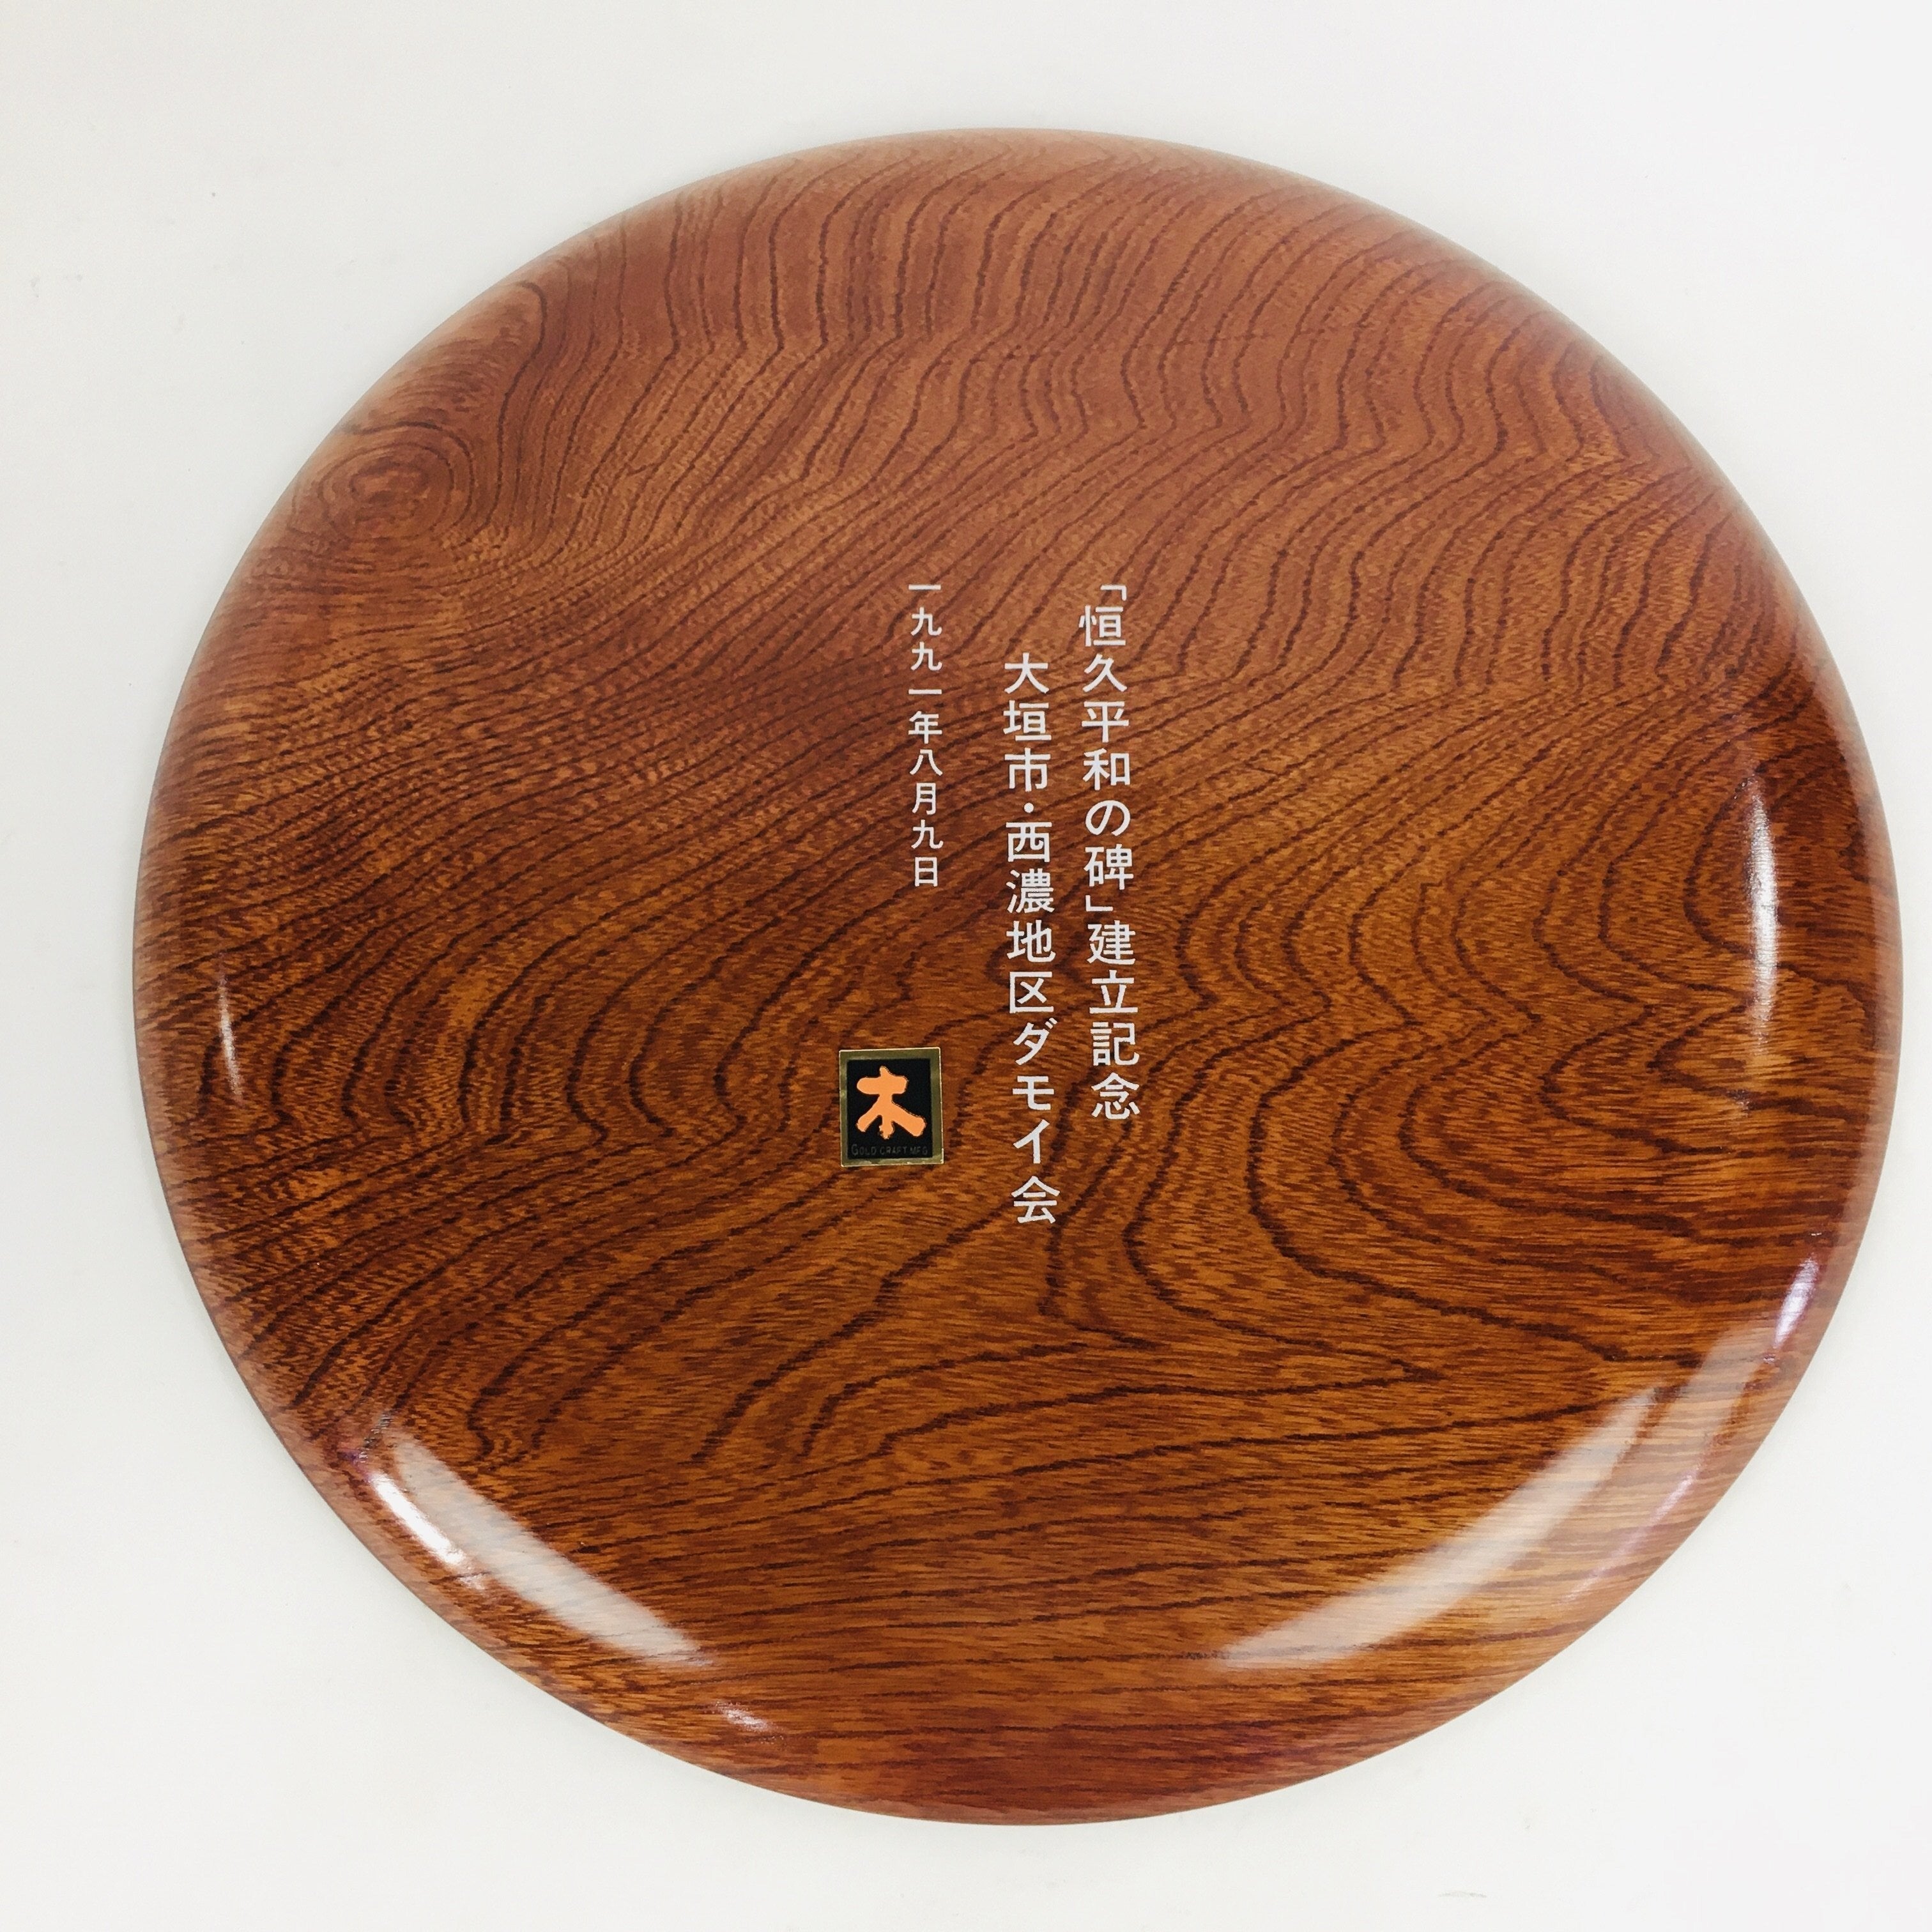 Japanese Wooden Lacquered Tray Obon Vtg Nurimono Brown Round Shape LWB46